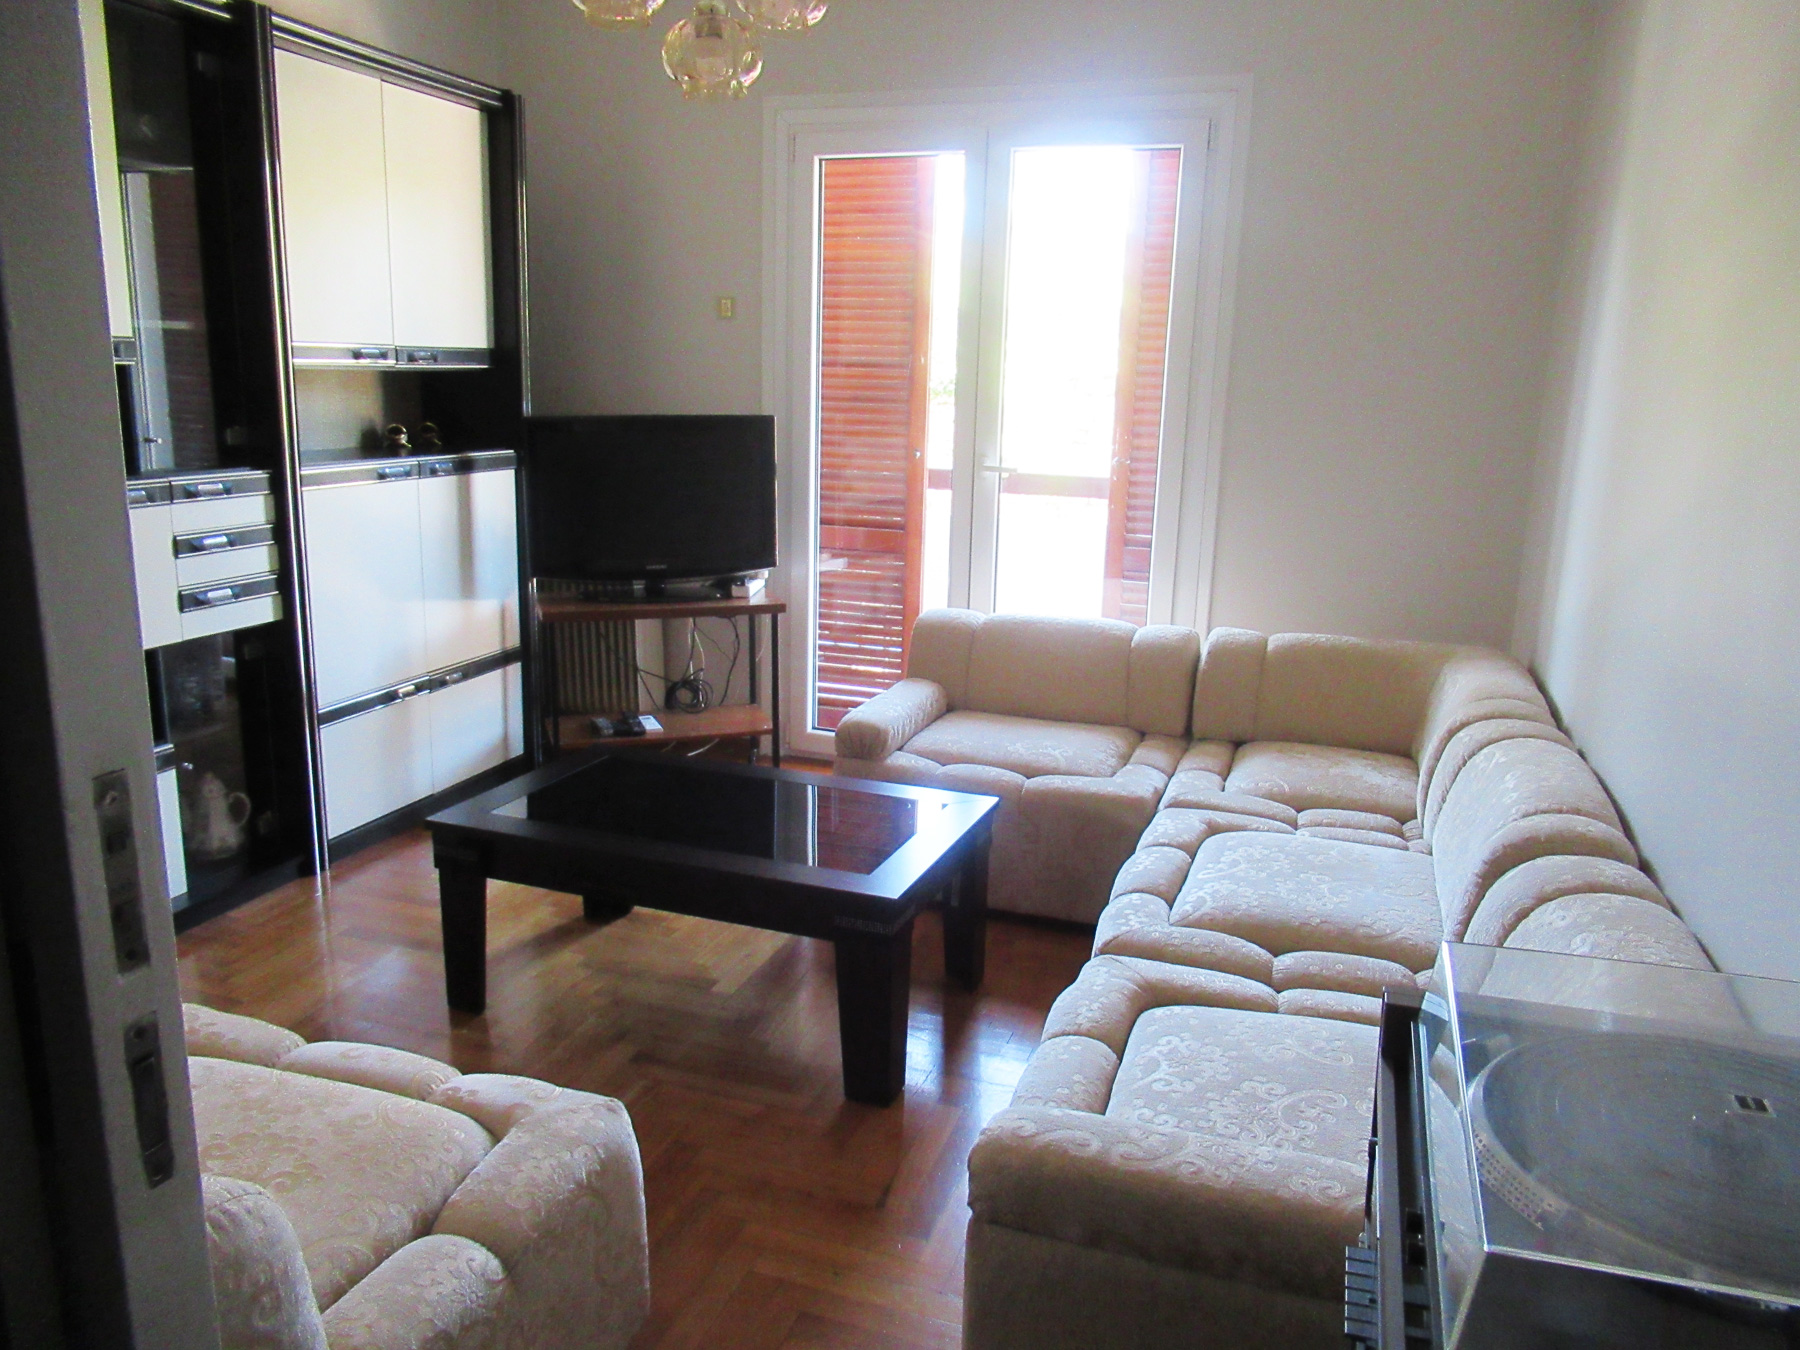 For rent a comfortable furnished two bedroom apartment of 60 sq.m. 2nd floor near L. Dodonis in Ioannina.